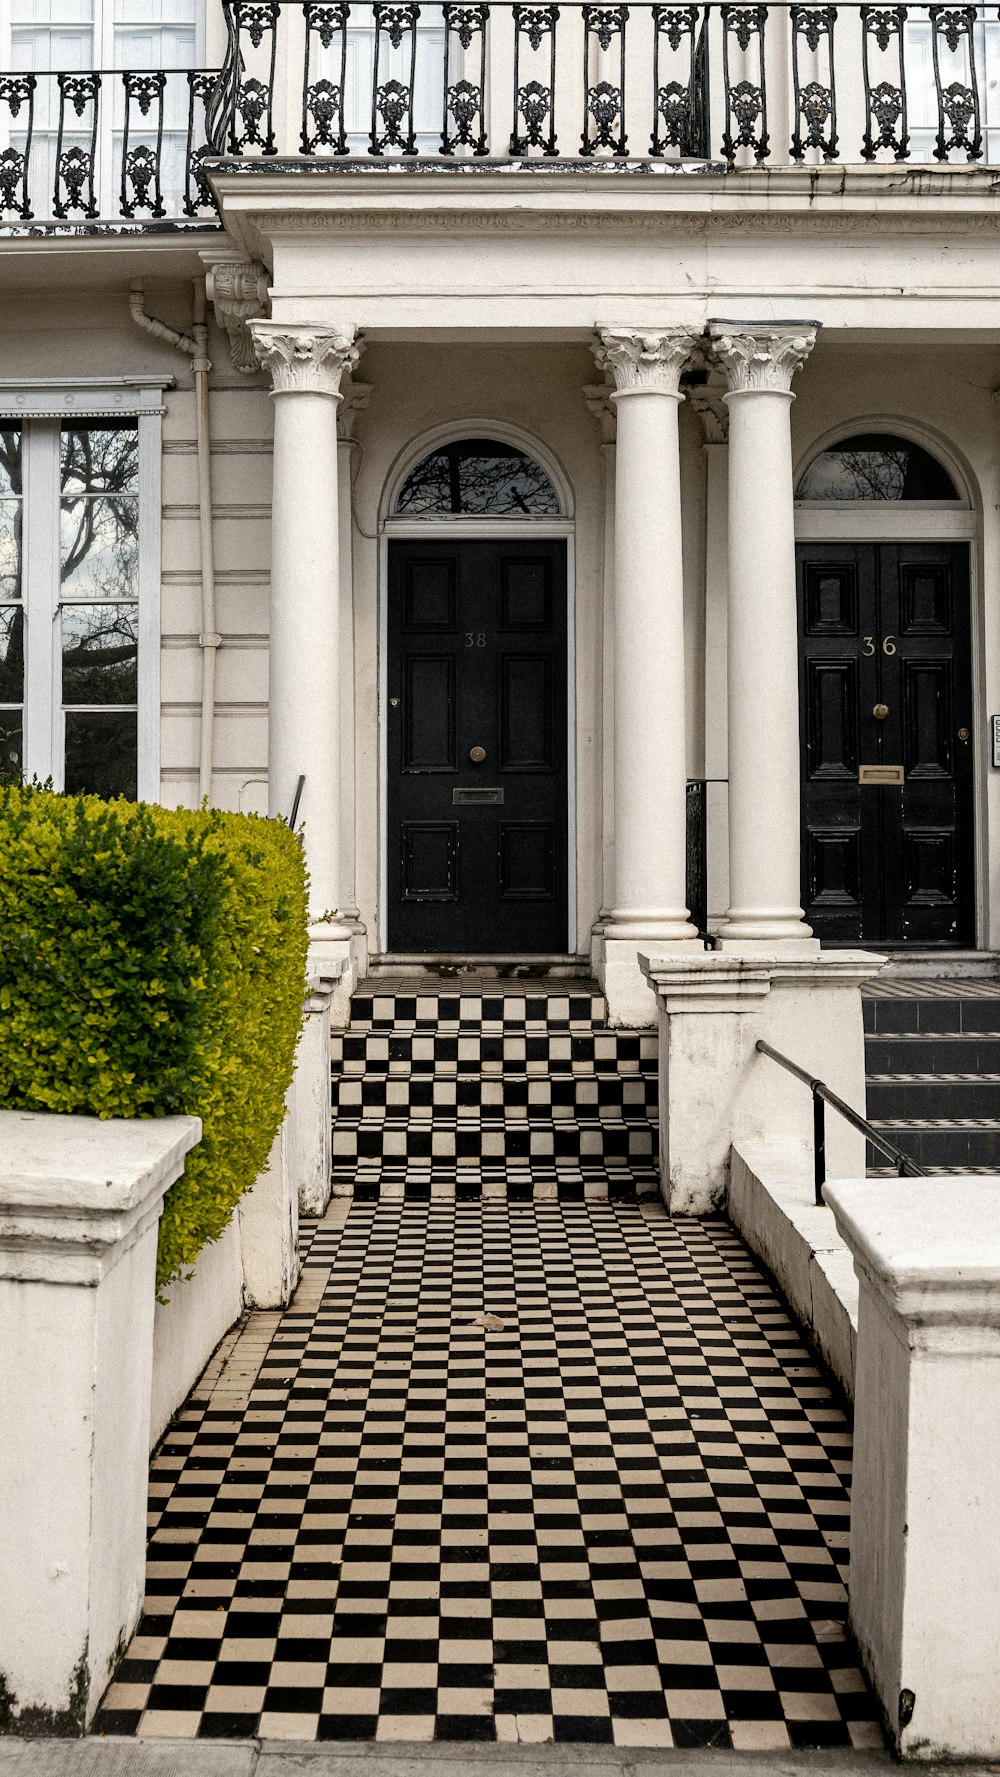 a black and white checkered floor in front of a building